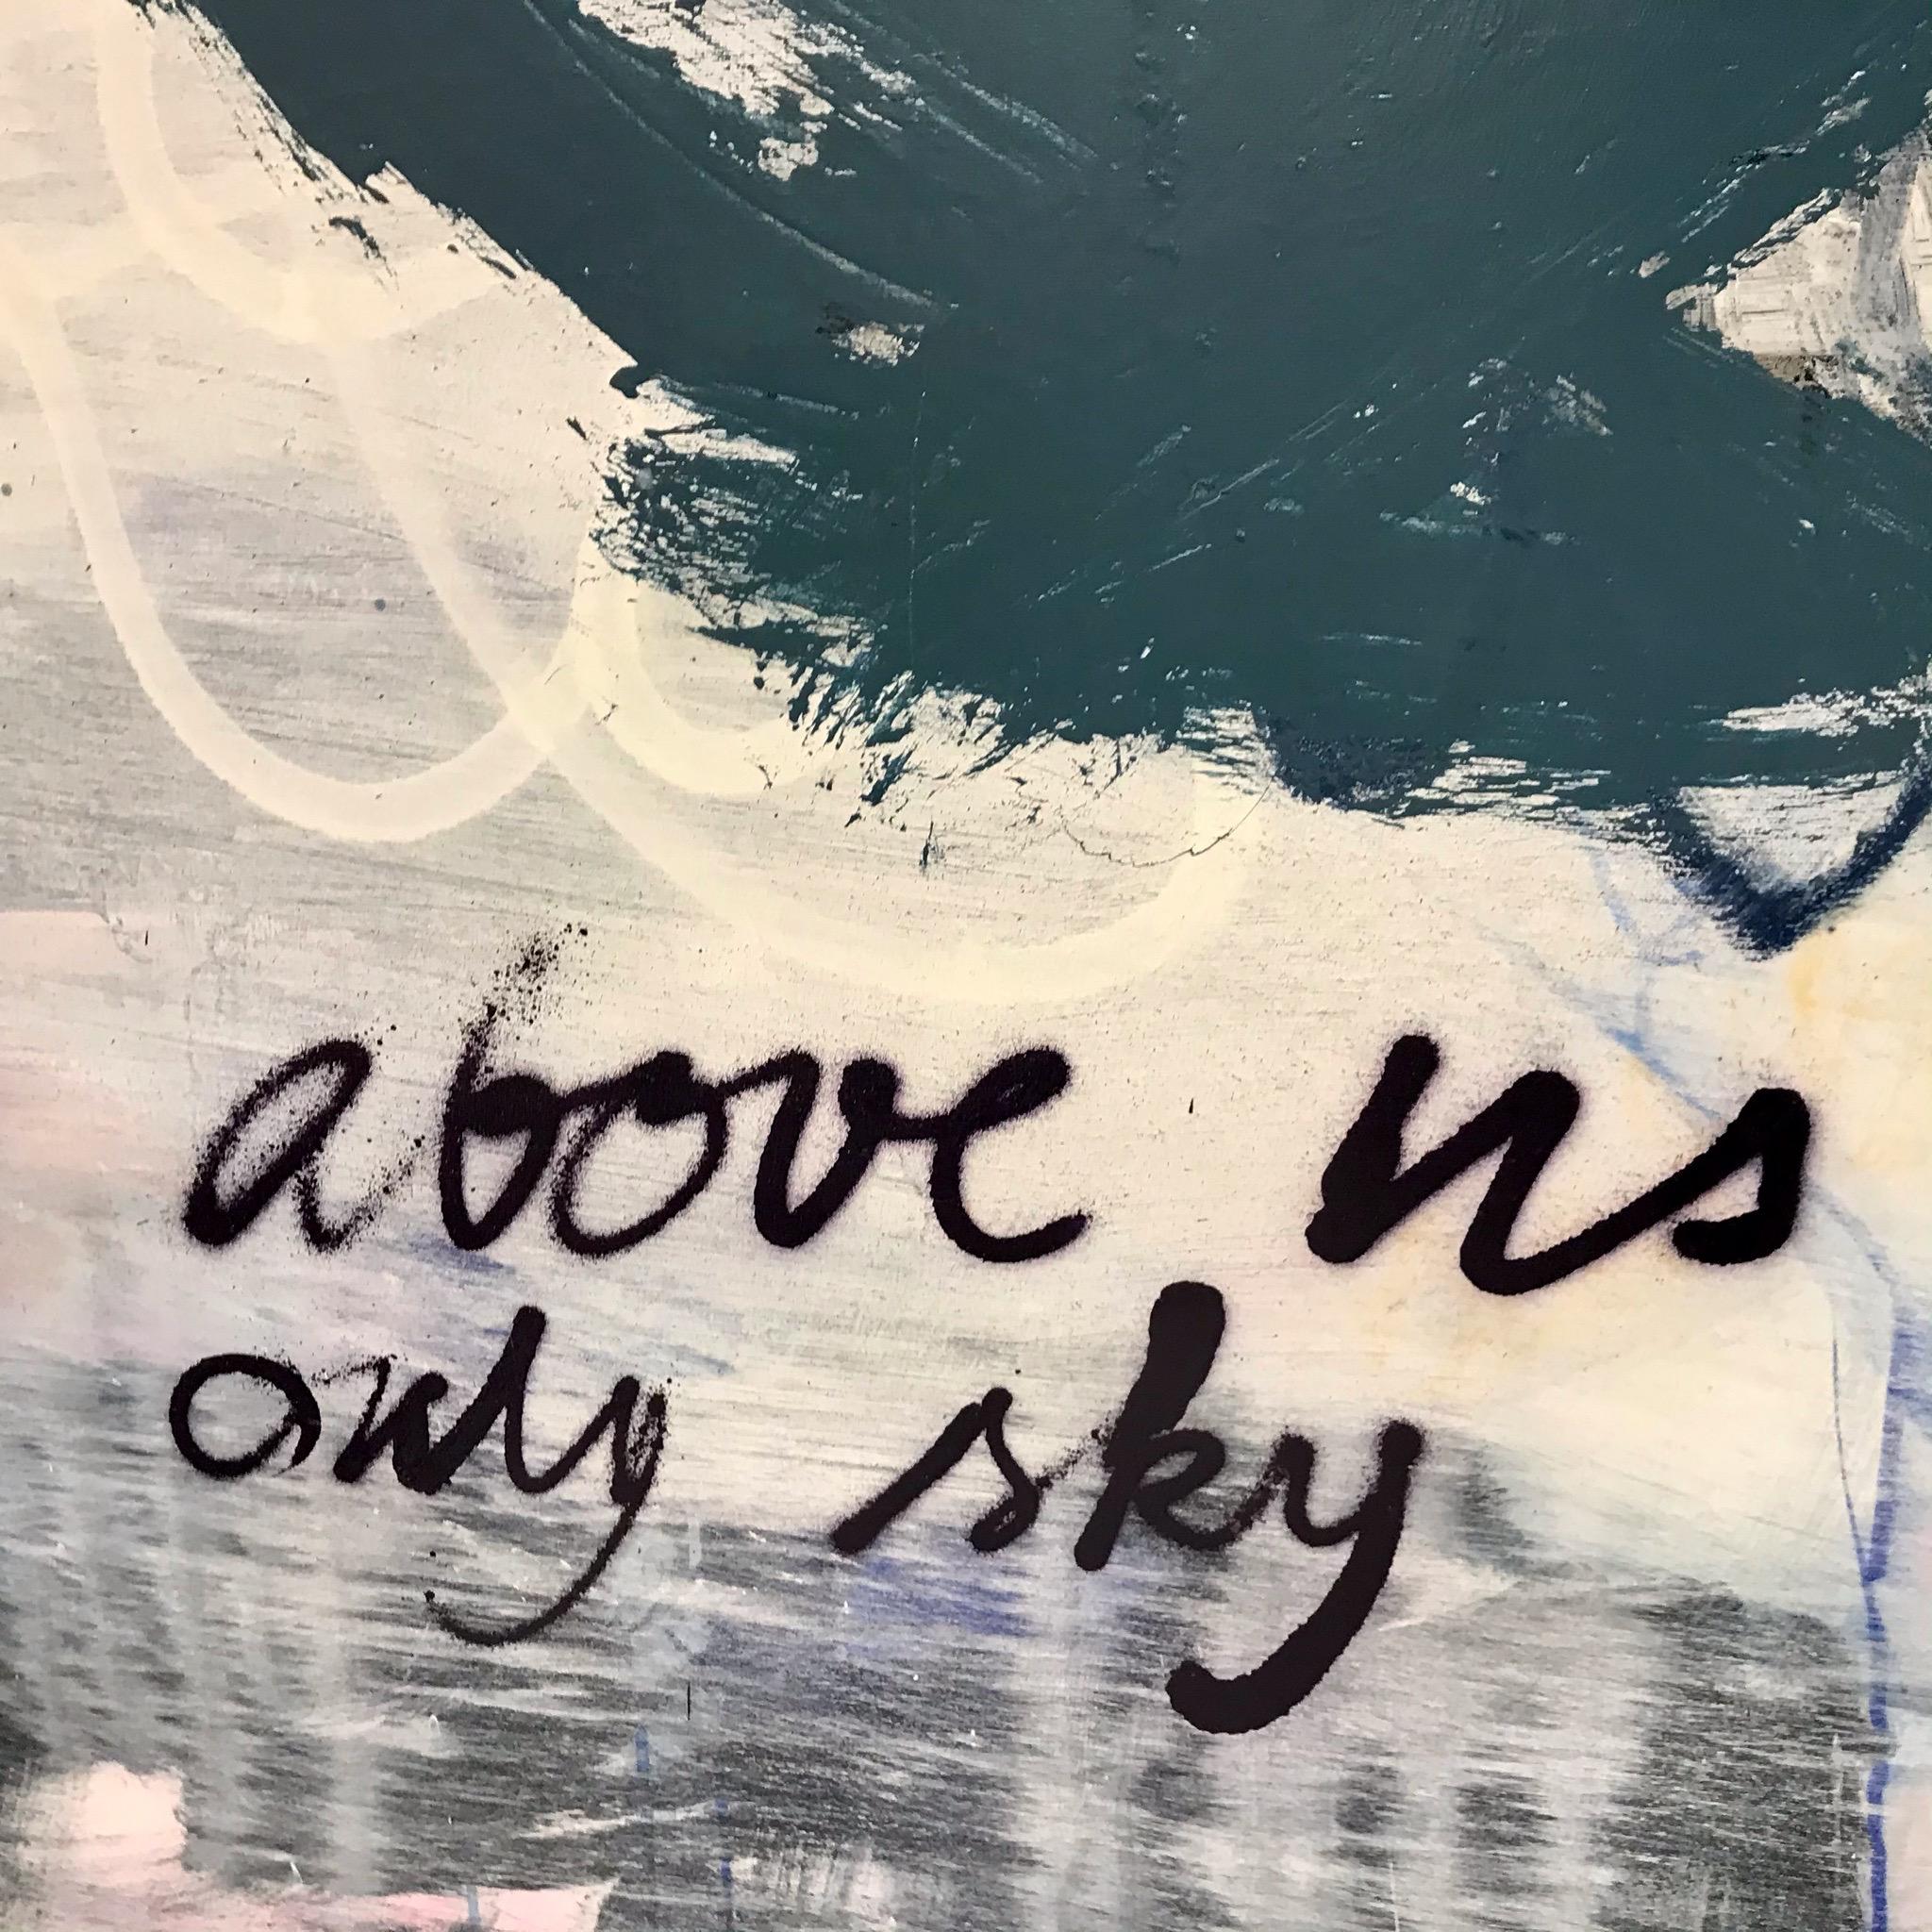 Above us only sky (Abstract painting)

Acrylic and spraypaint on un-stretched canvas - Unframed.

Shipped rolled in a tube.

This artwork is exclusive to IdeelArt.

Knaut builds her compositions slowly over time, adding layers of colours and